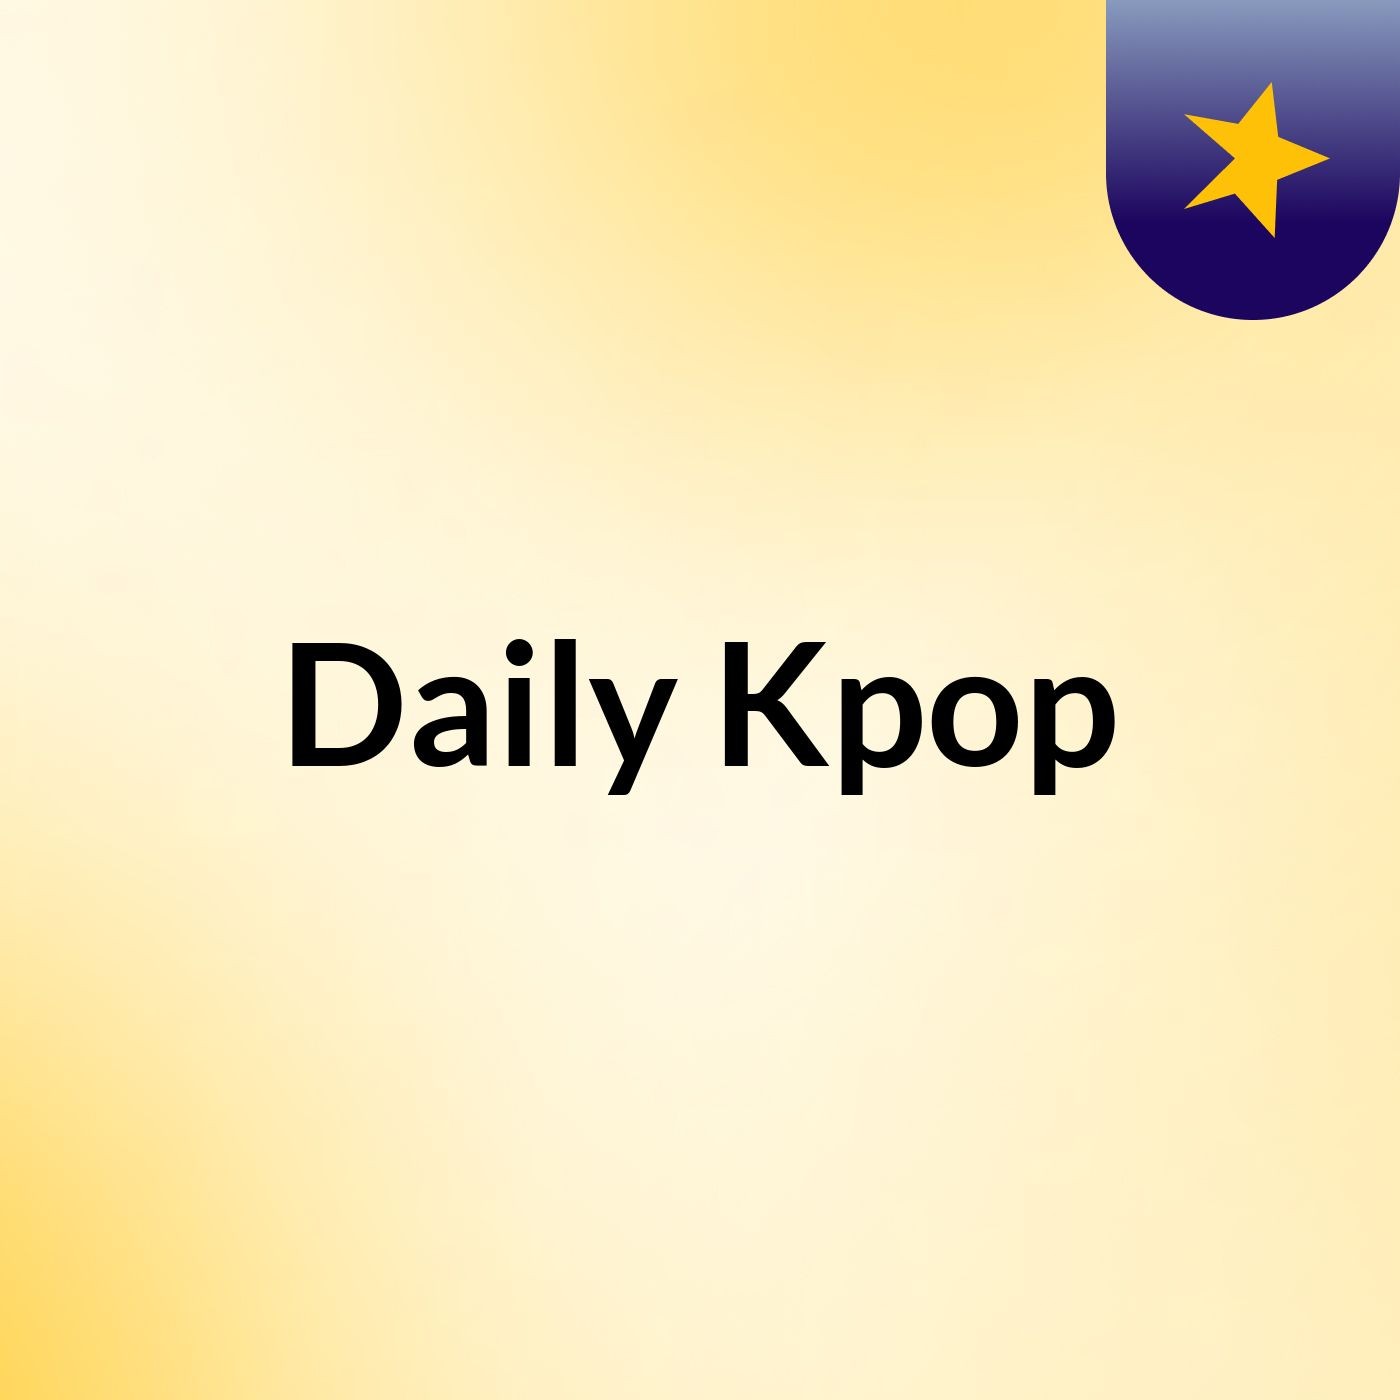 Episode 1 - Daily Kpop